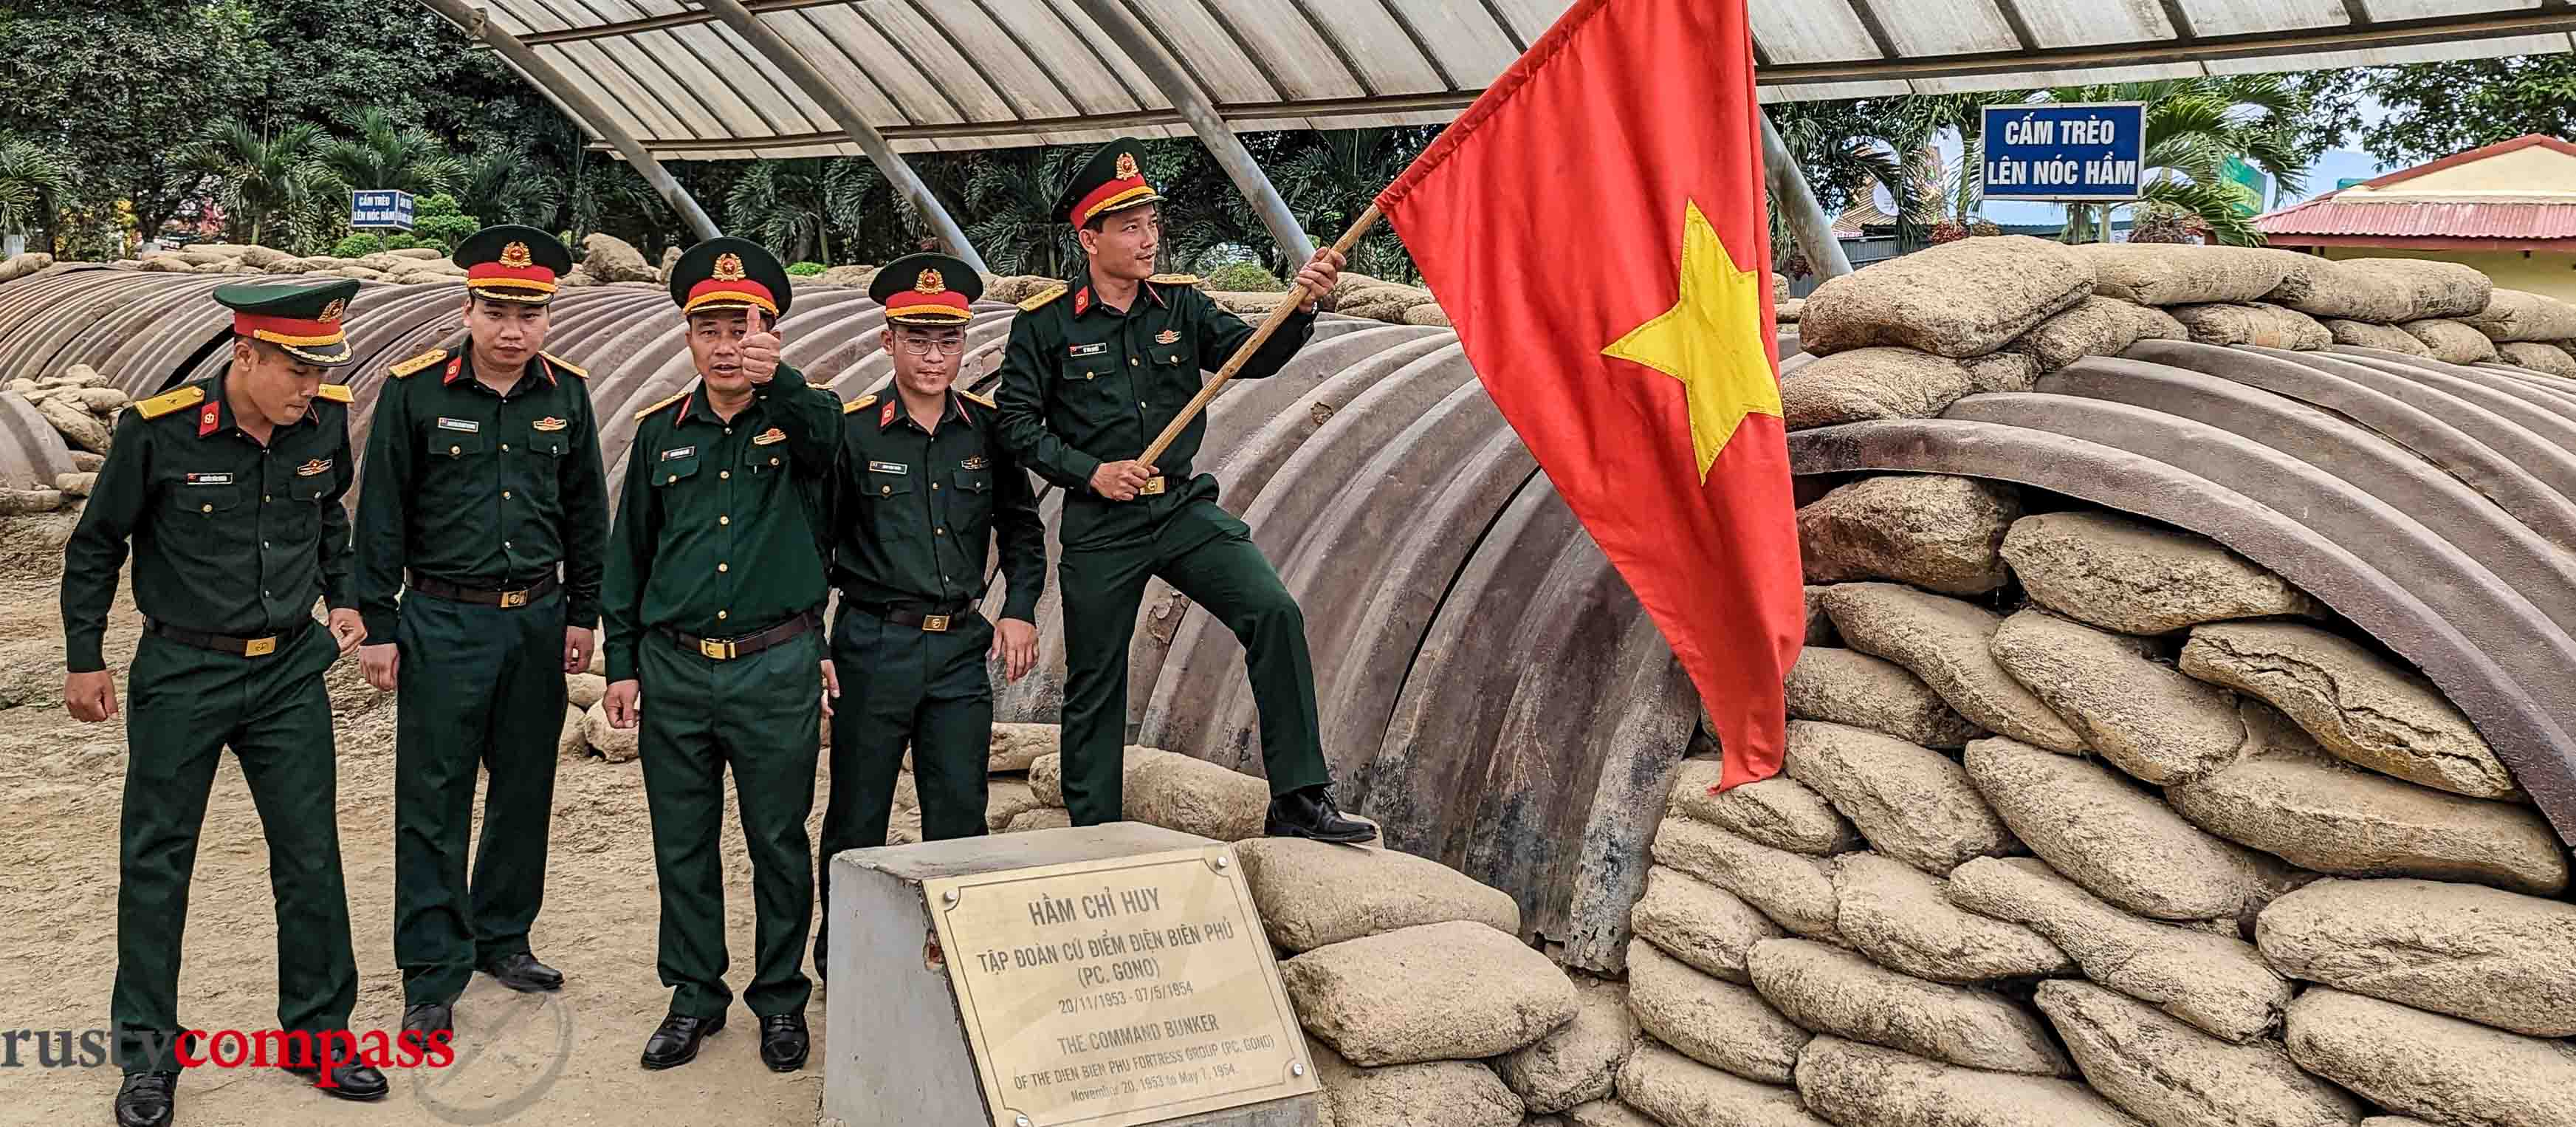 Vietnamese soldiers recreate an iconic photo of victory at Dien Bien Phu - 70 years later.